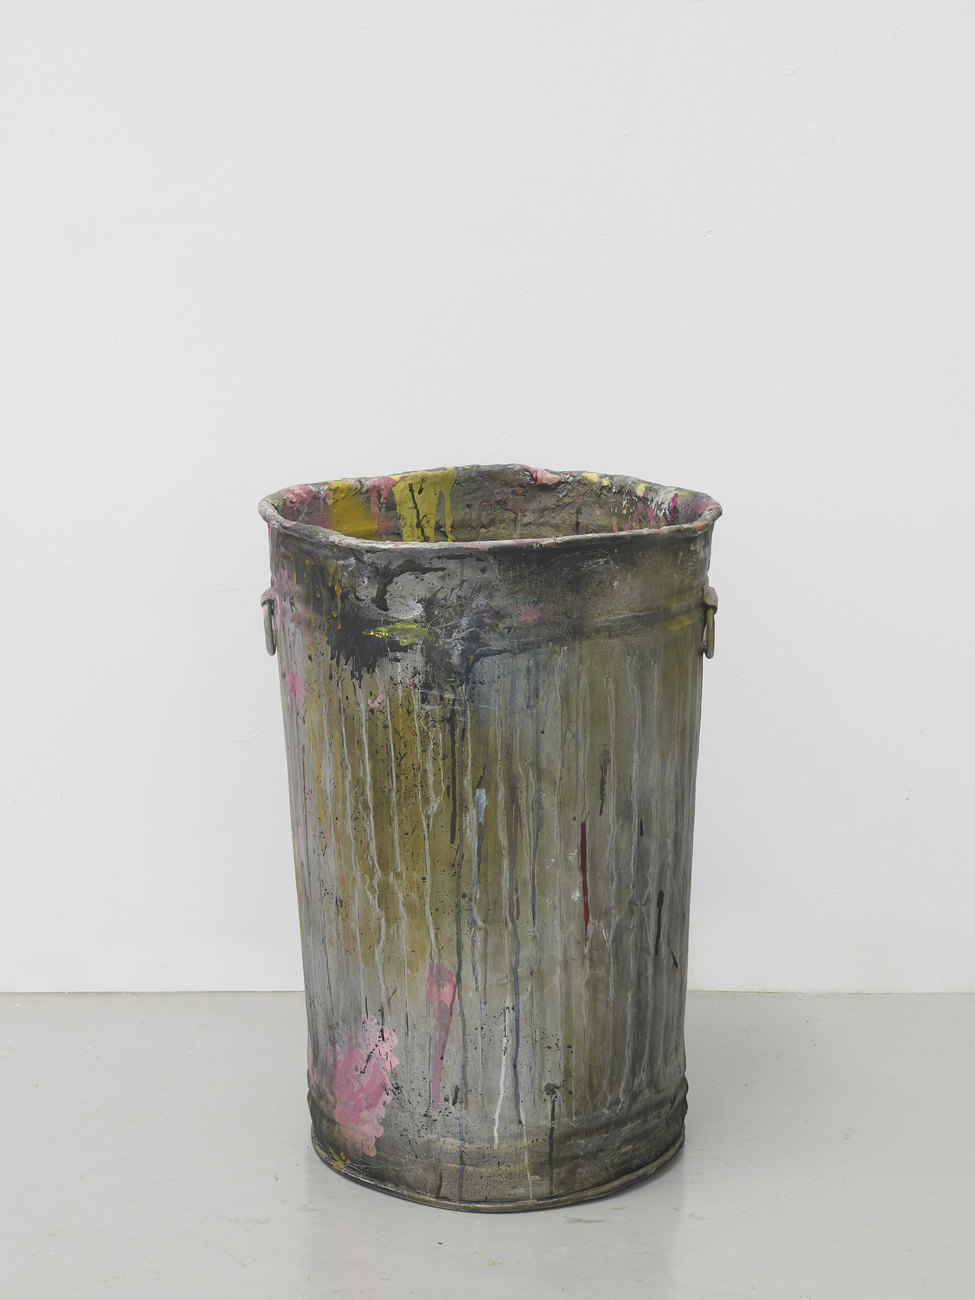 Painting of a Dustbin